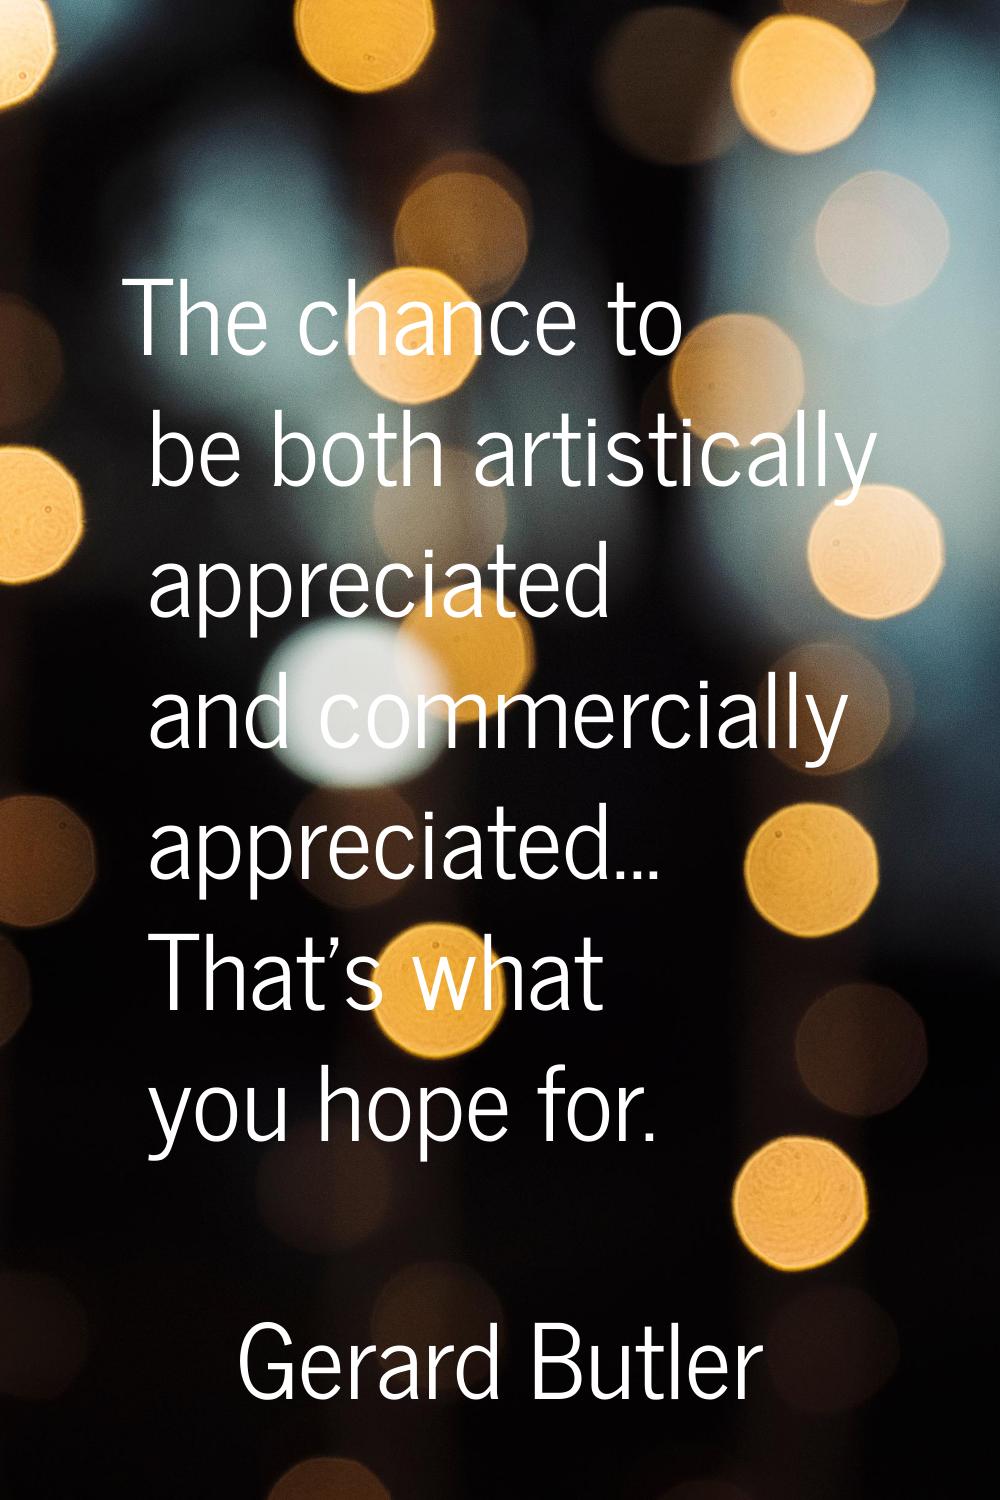 The chance to be both artistically appreciated and commercially appreciated... That's what you hope